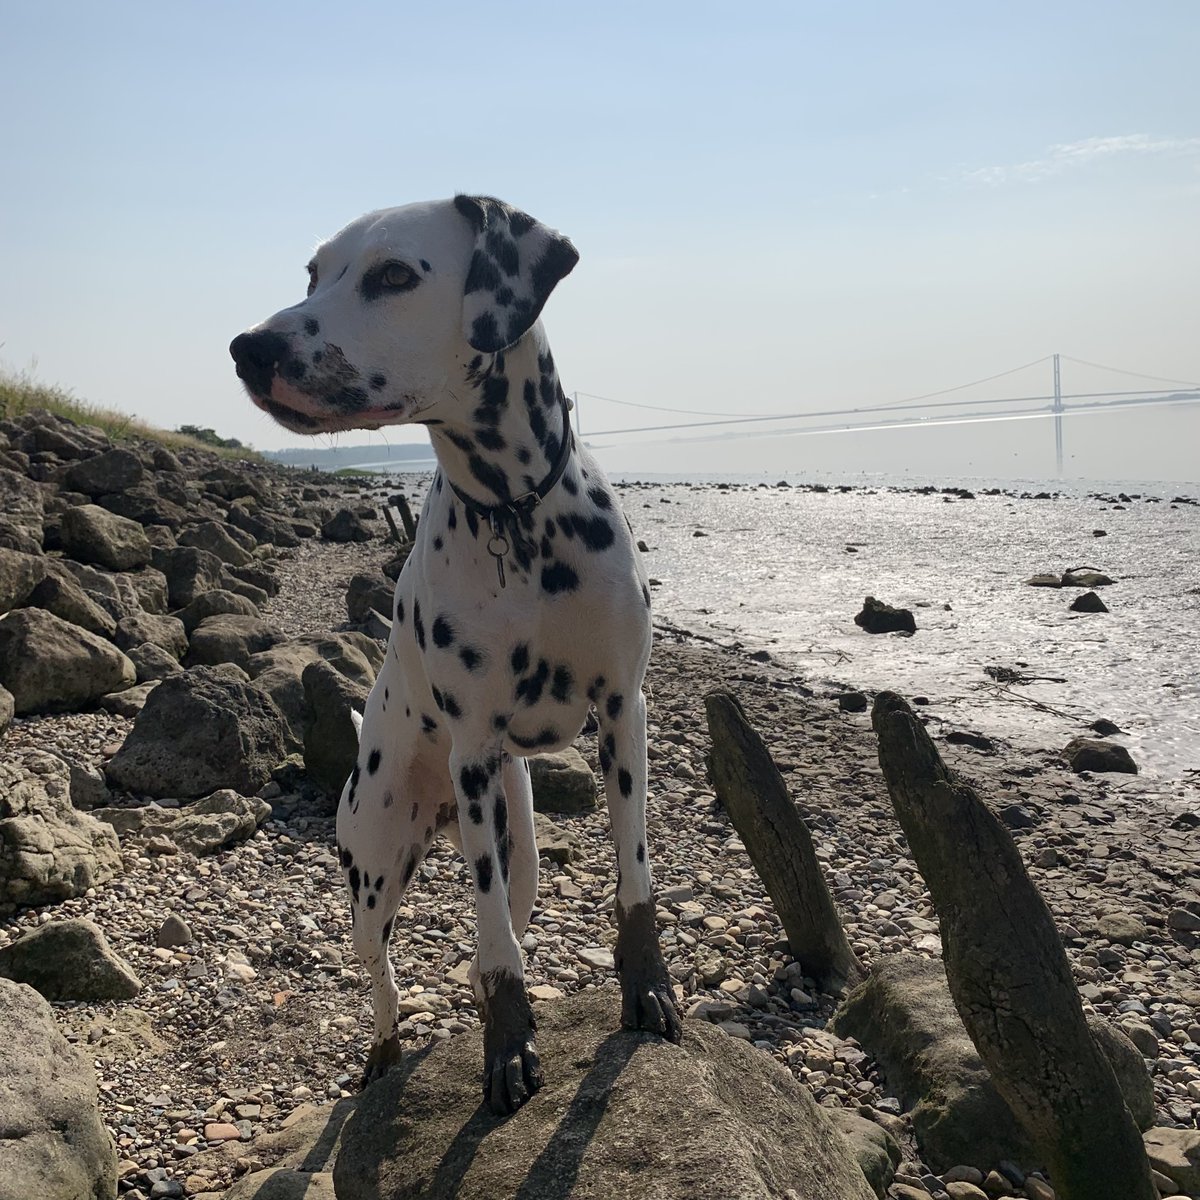 Next stop the car, and where is the Mud Daddy, yep it's at home 🤣 My #muckypup Cora 😍

#corathedalmatian #humberbridge #riverhumber #yorkshirewoldsway #Yorkshire #expansion #bridge #River #dalmatian #mygirl #muddy #dogsoftwitter #dogwalk